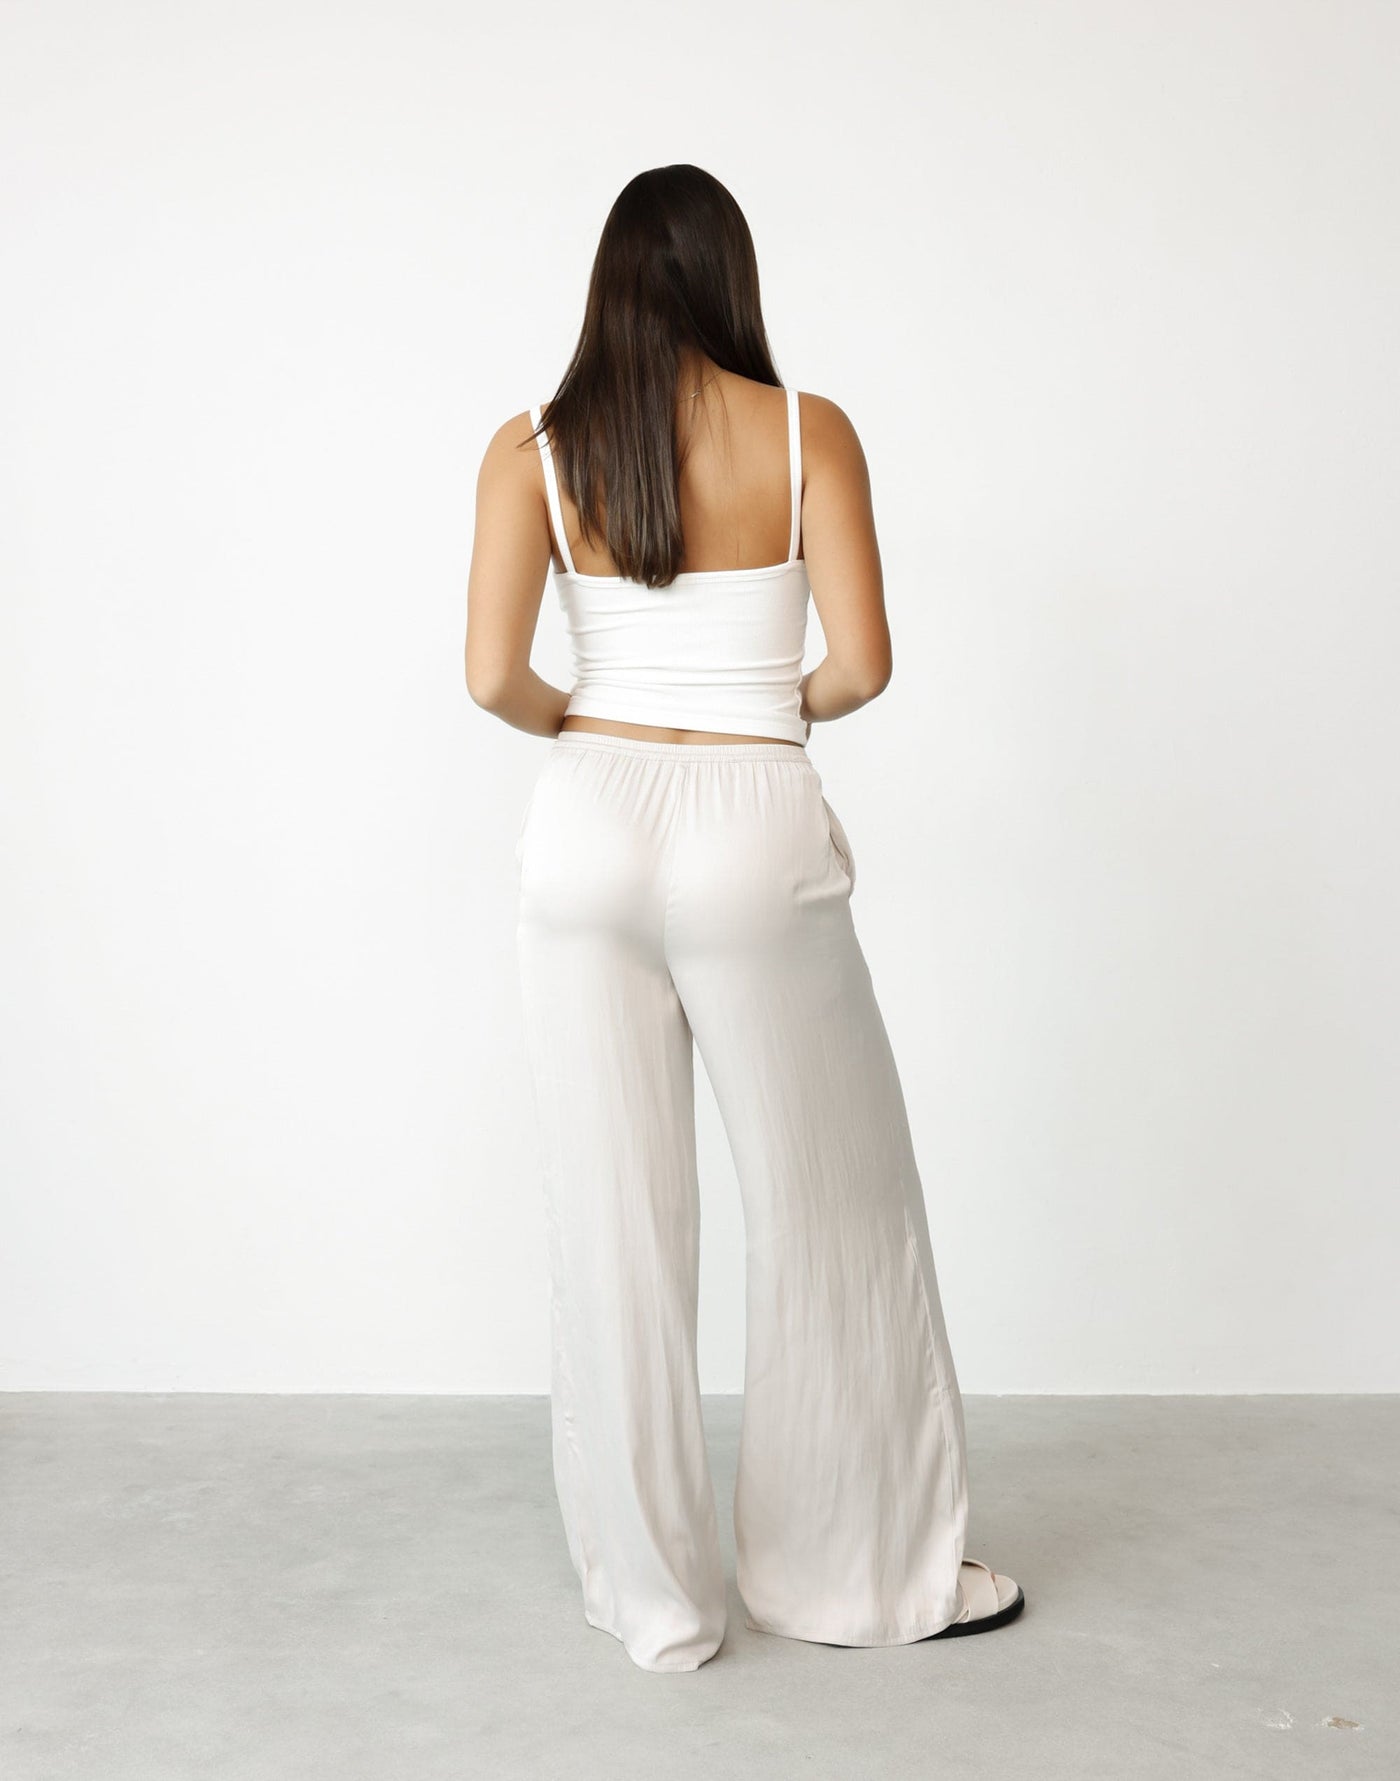 Aspen Pants (Oyster) | CHARCOAL Exclusive - Elasticated Tie Up Waist Band Wide Leg Pants - Women's Pants - Charcoal Clothing